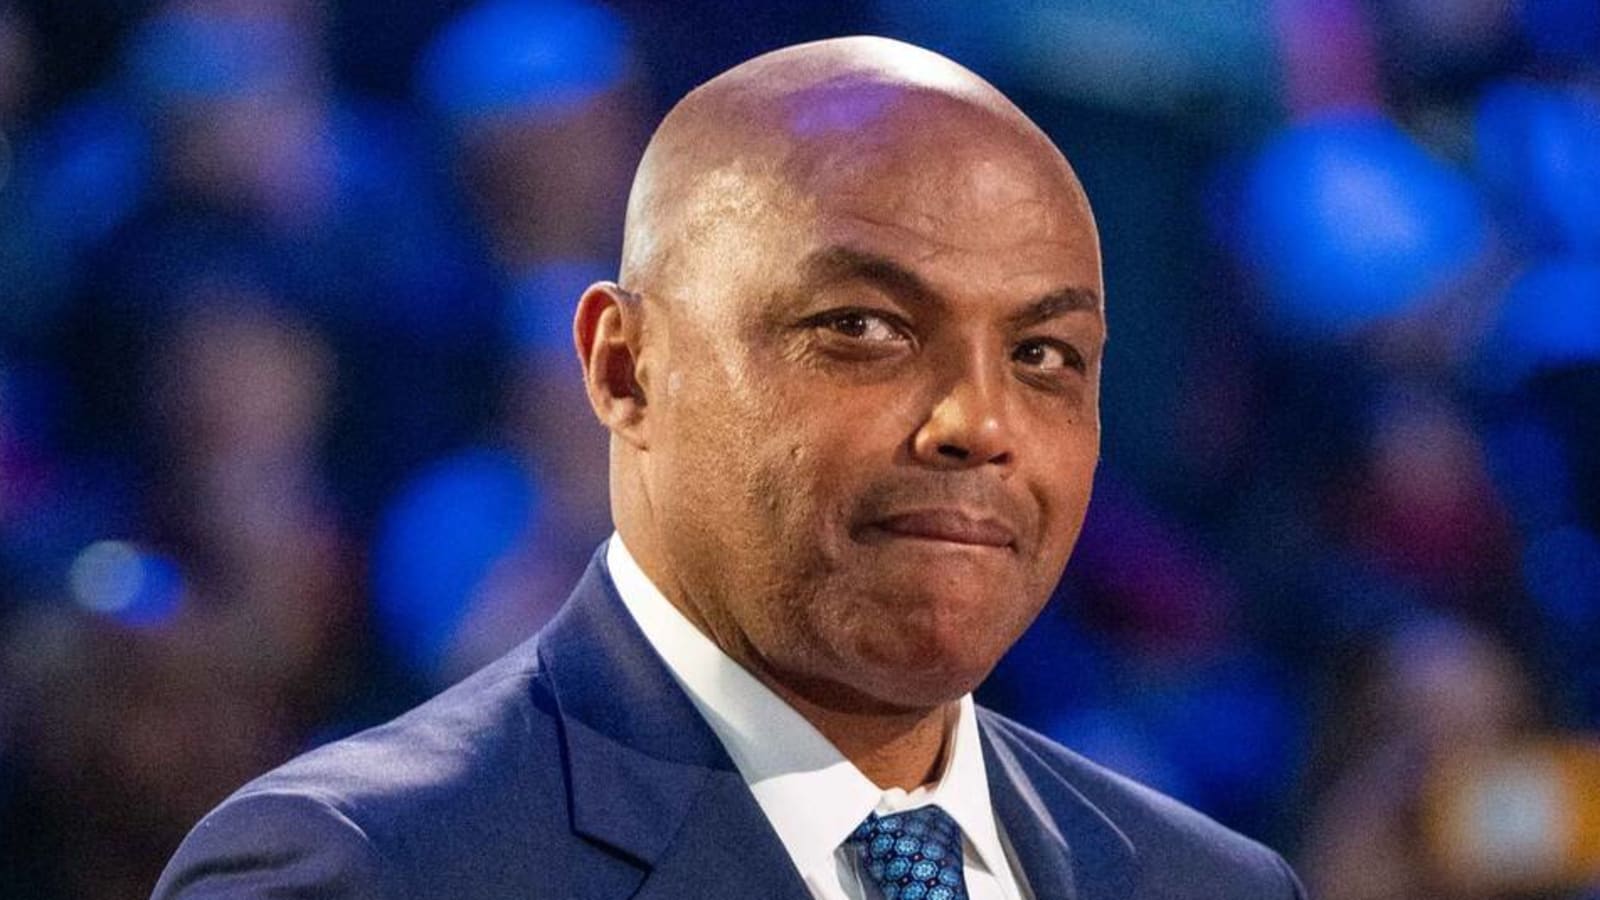 Charles Barkley has hilarious quote about LIV Golf money